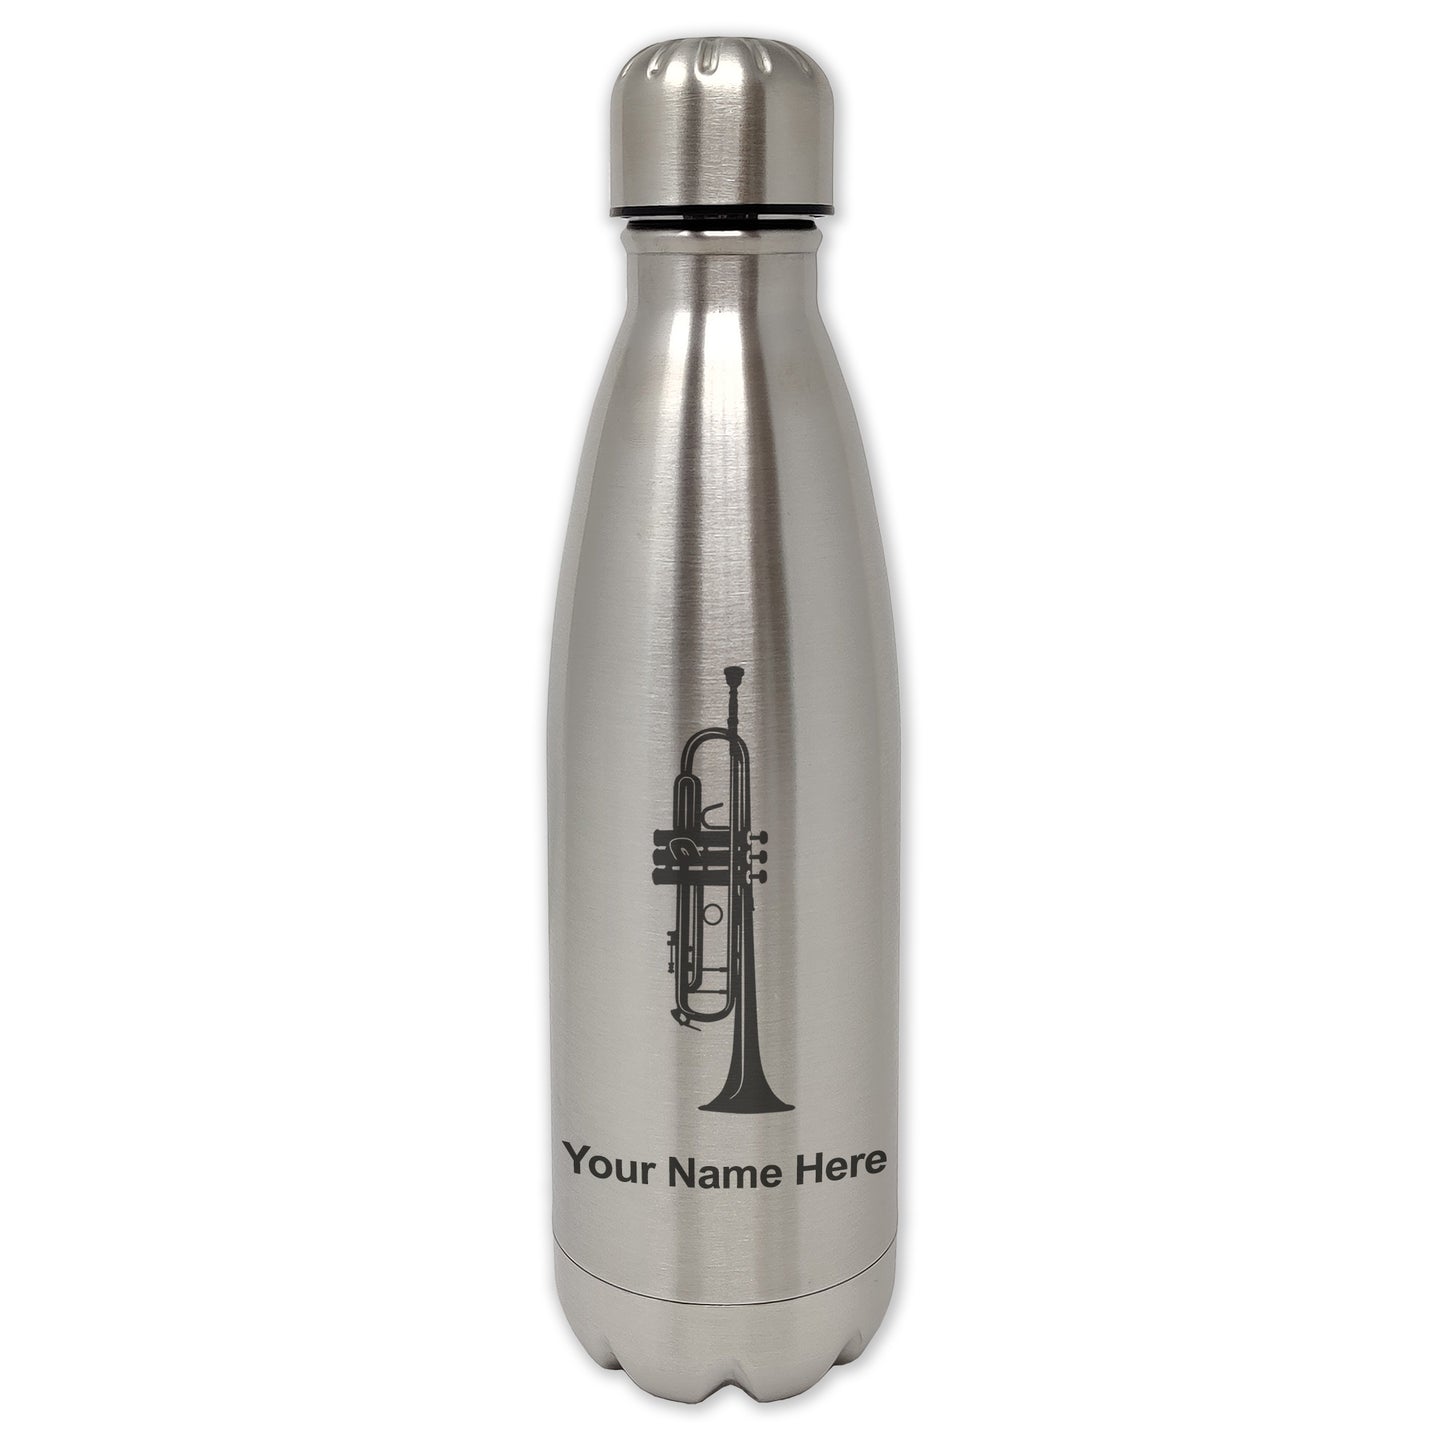 LaserGram Single Wall Water Bottle, Trumpet, Personalized Engraving Included